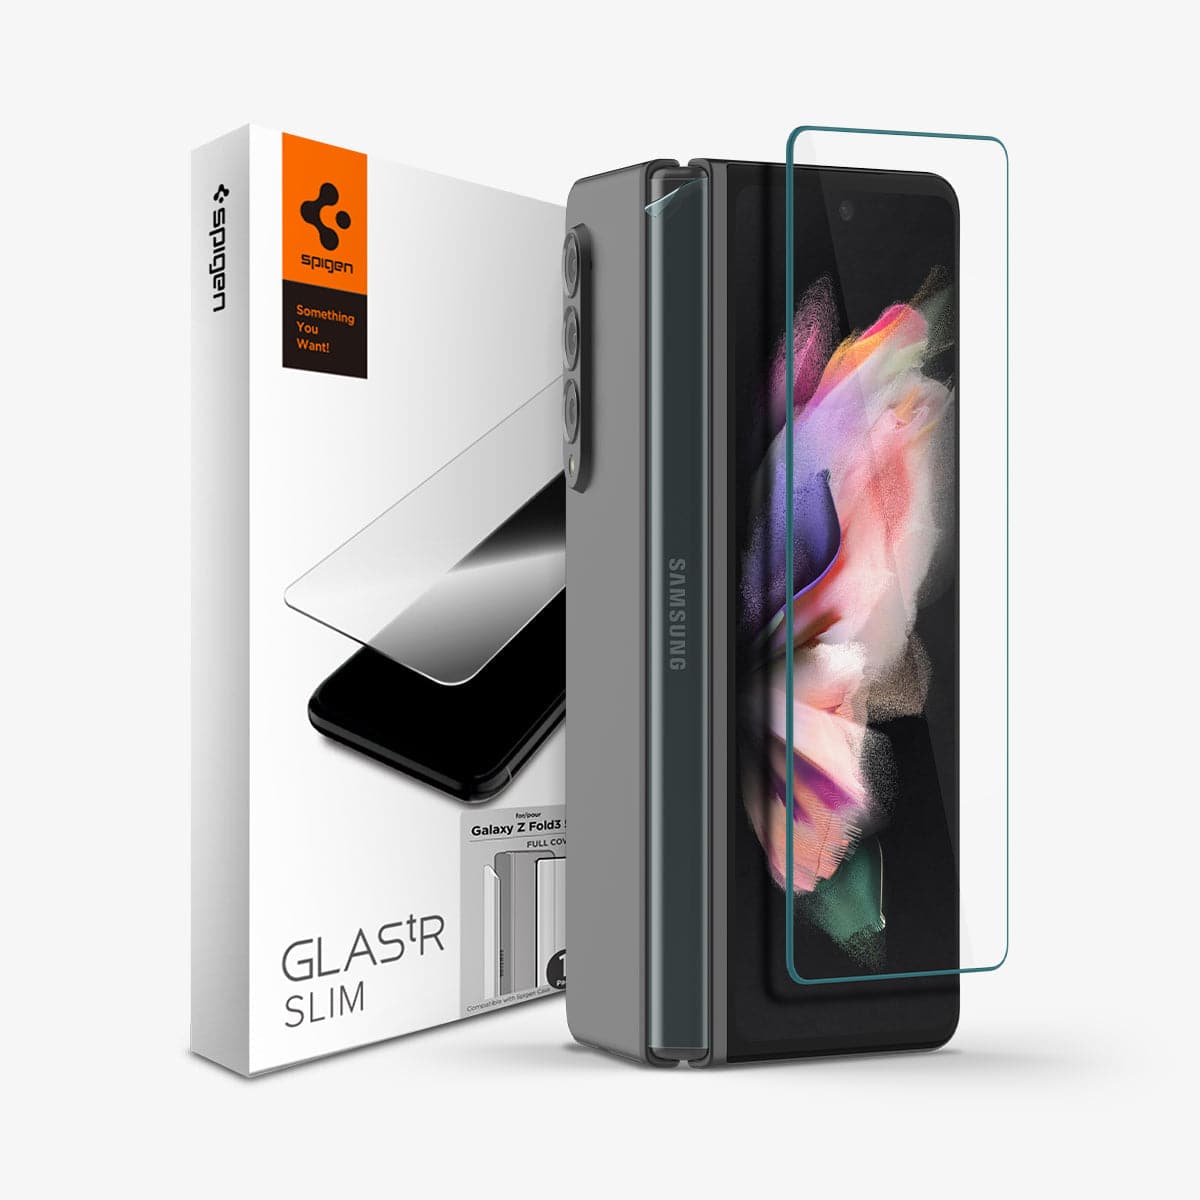 AGL03836 - Galaxy Z Fold 3 Screen Protector GLAS.tR Full Cover Glass + Hinge Film showing the packaging, device, tempered glass screen protector and hinge film